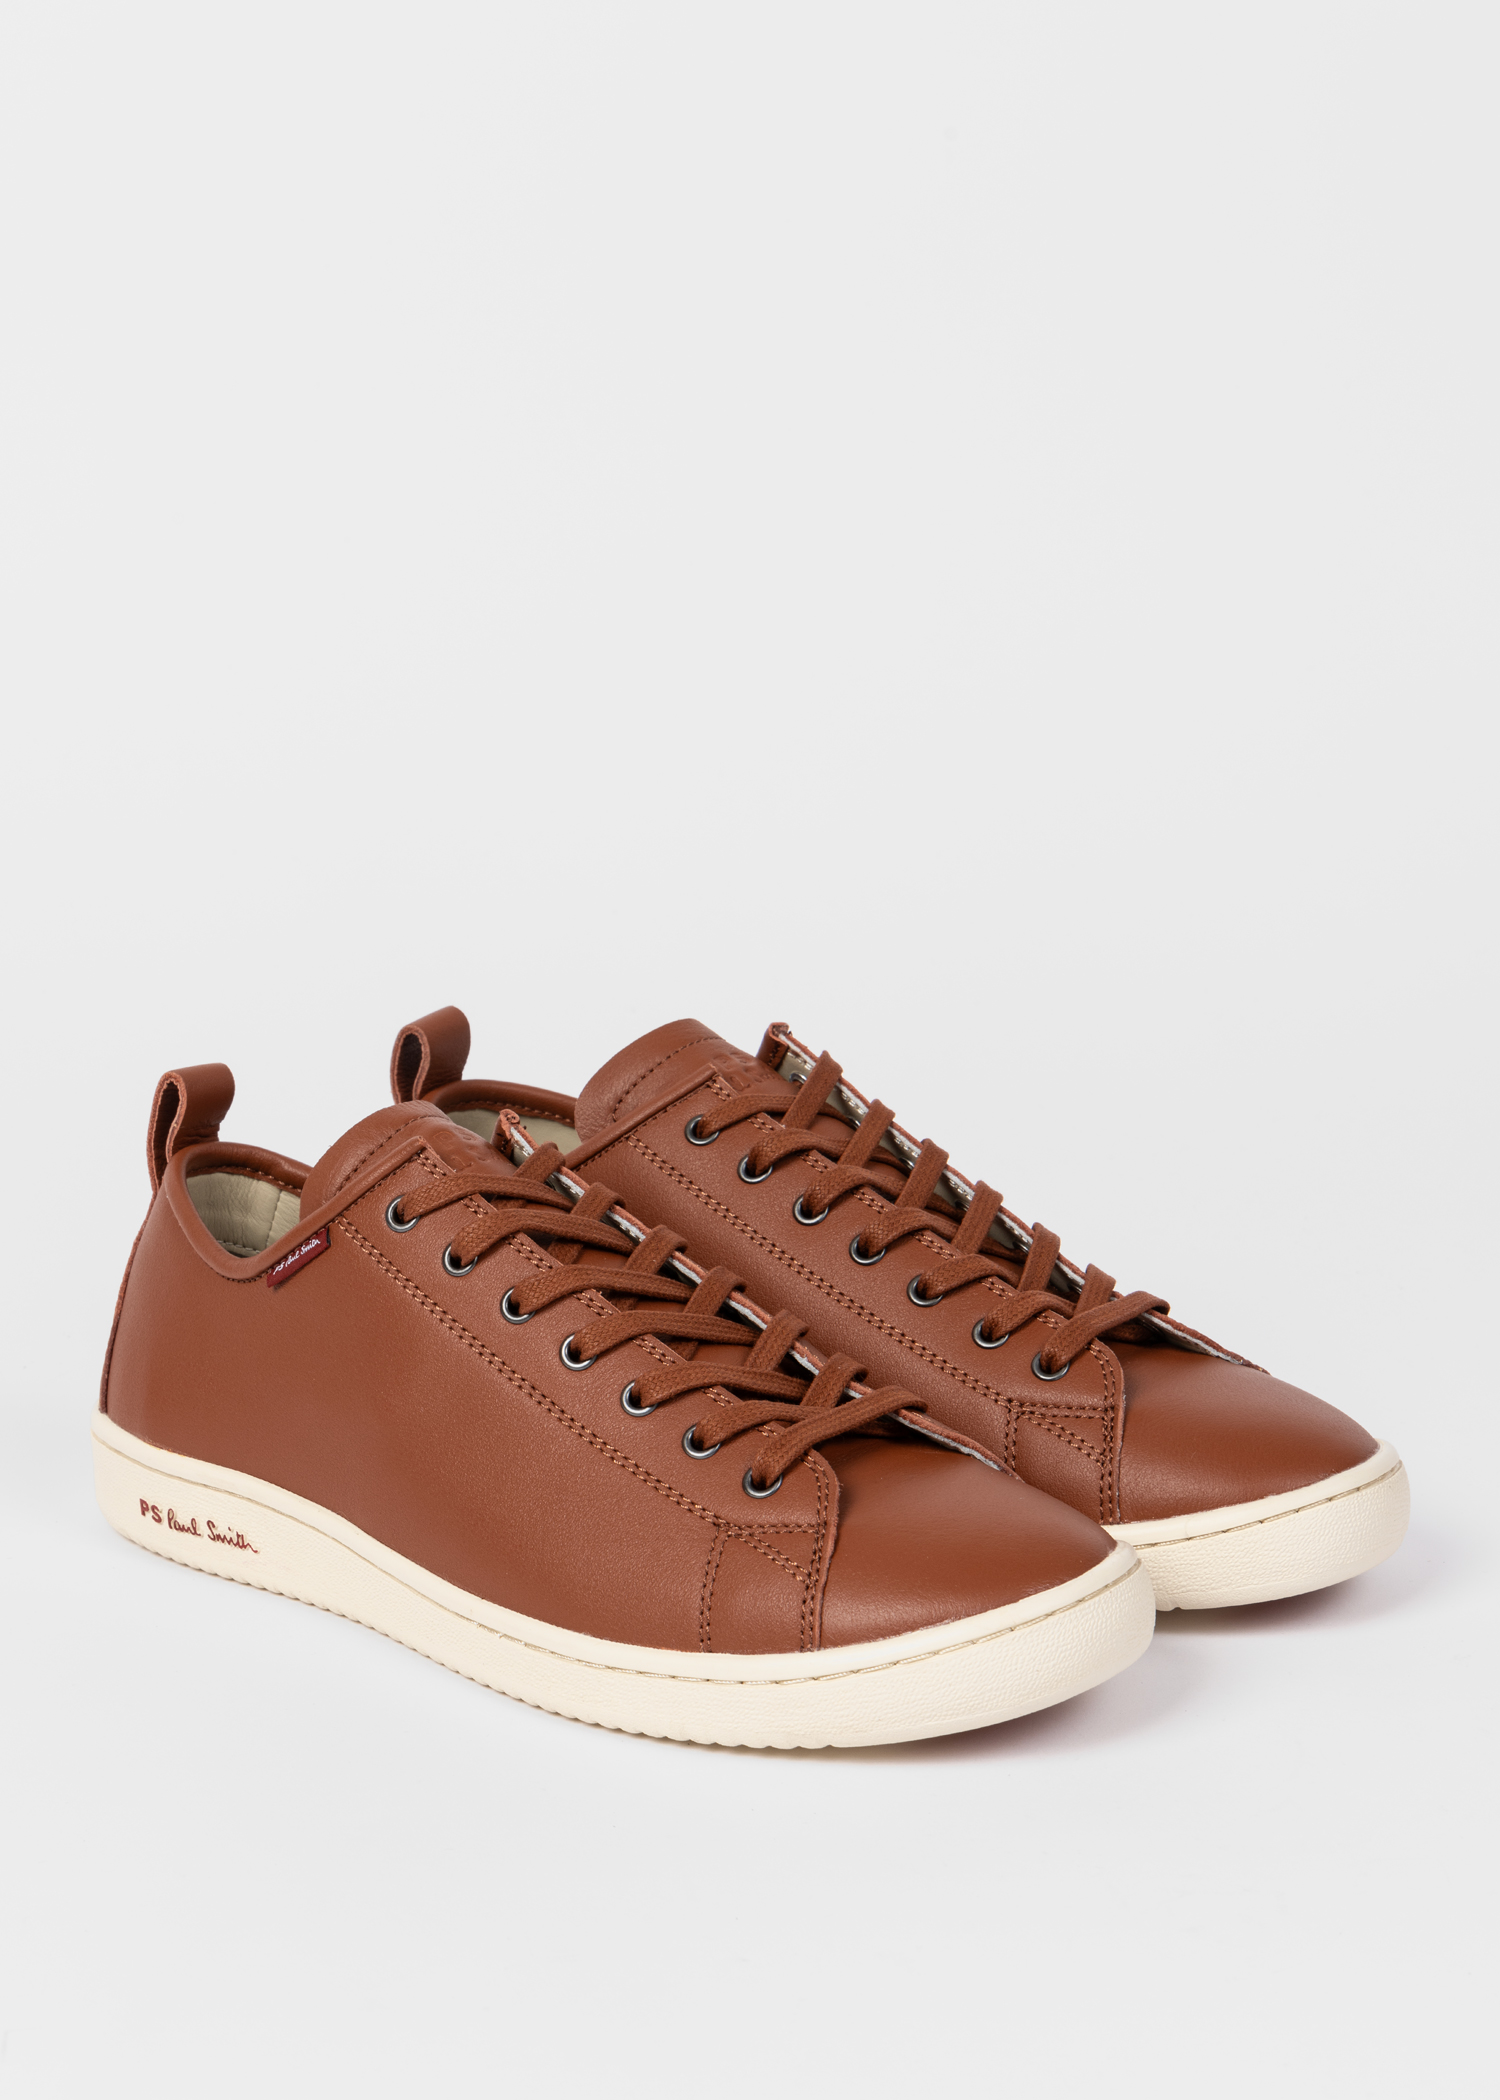 Designer PS Paul Smith Trainers for Men | Paul Smith